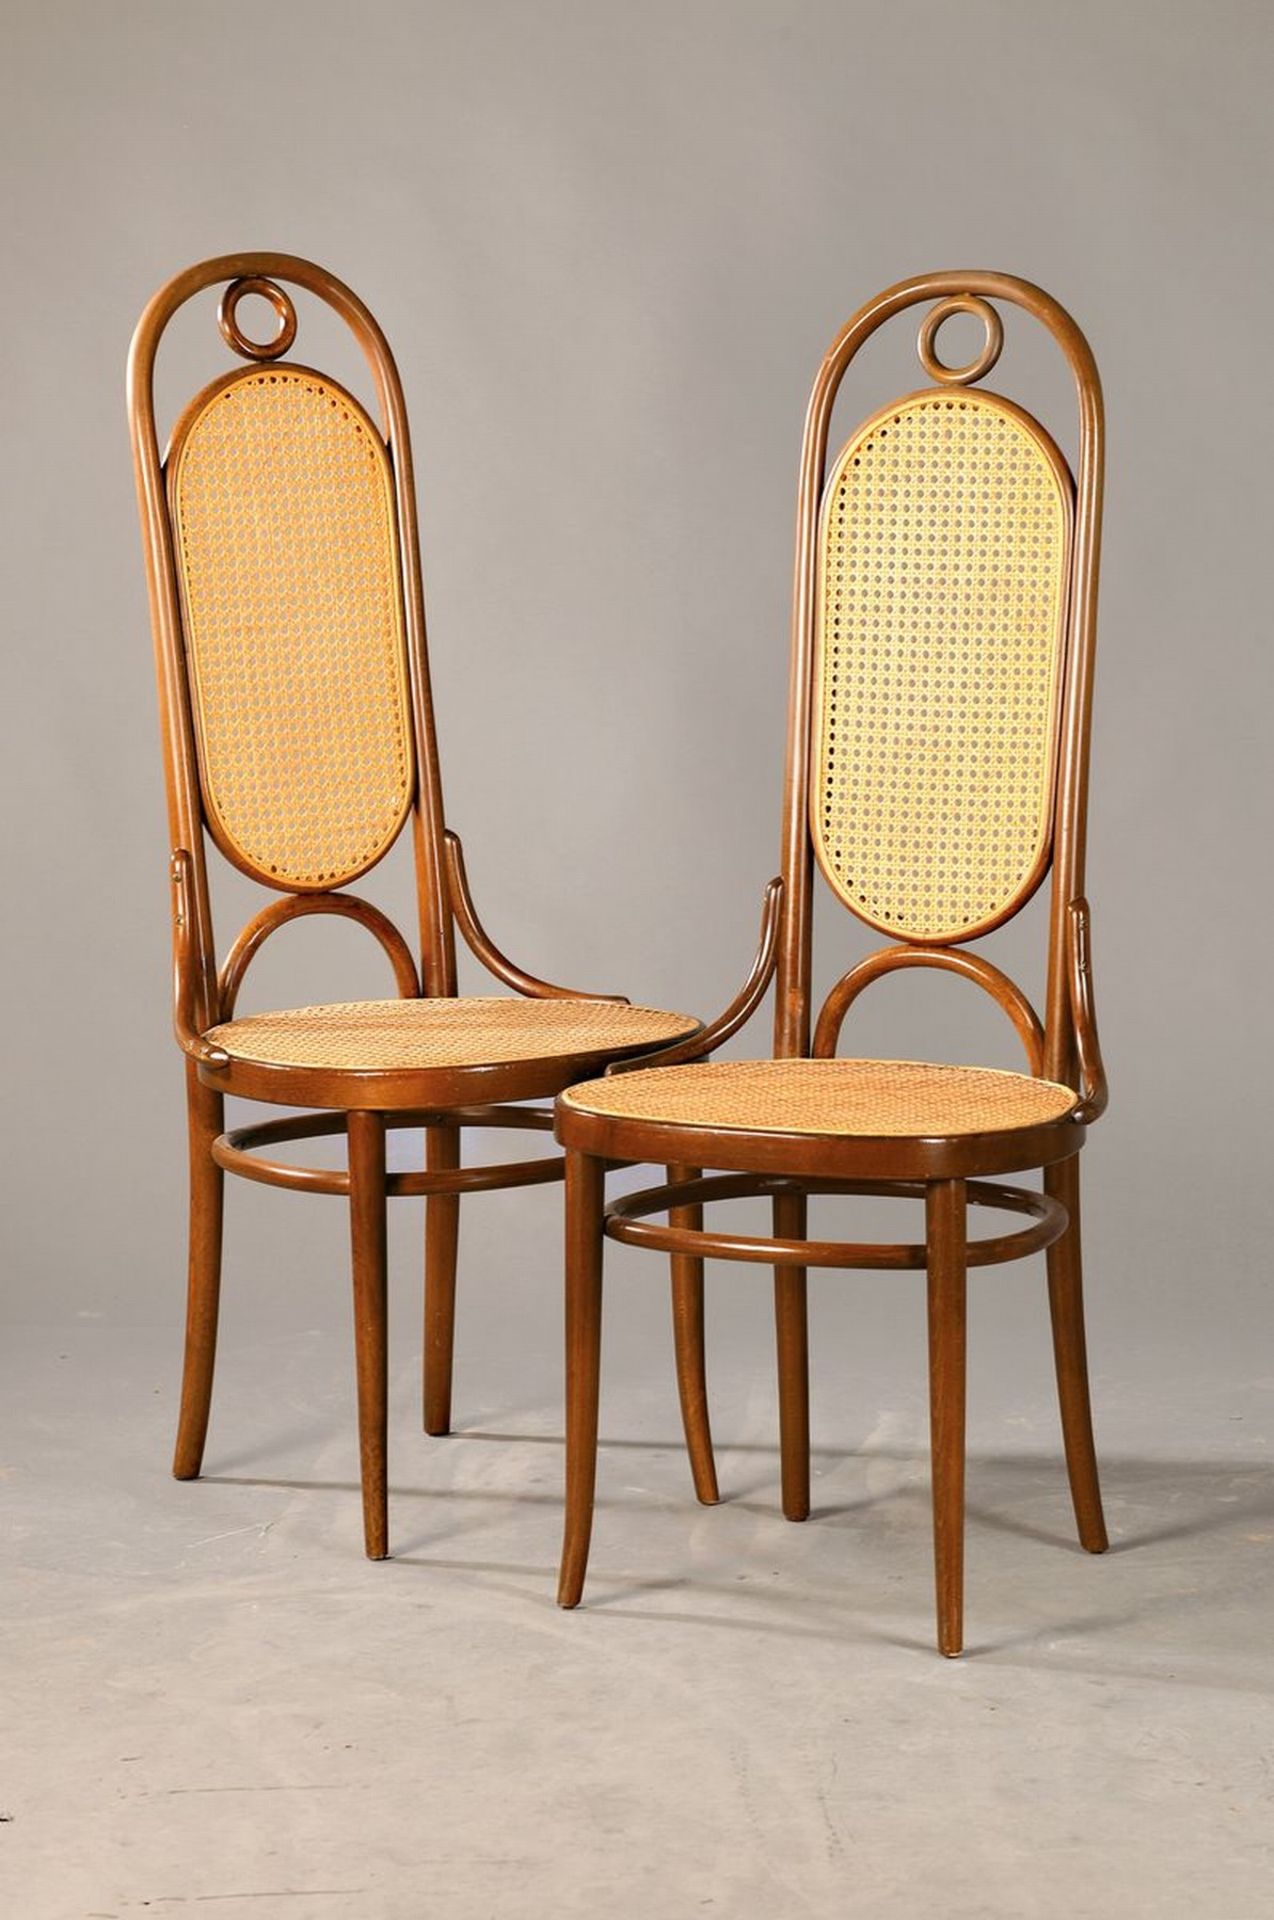 6 Thonet Stühle, Modell Nr. 80, 20. Jh.,  Bugholz,